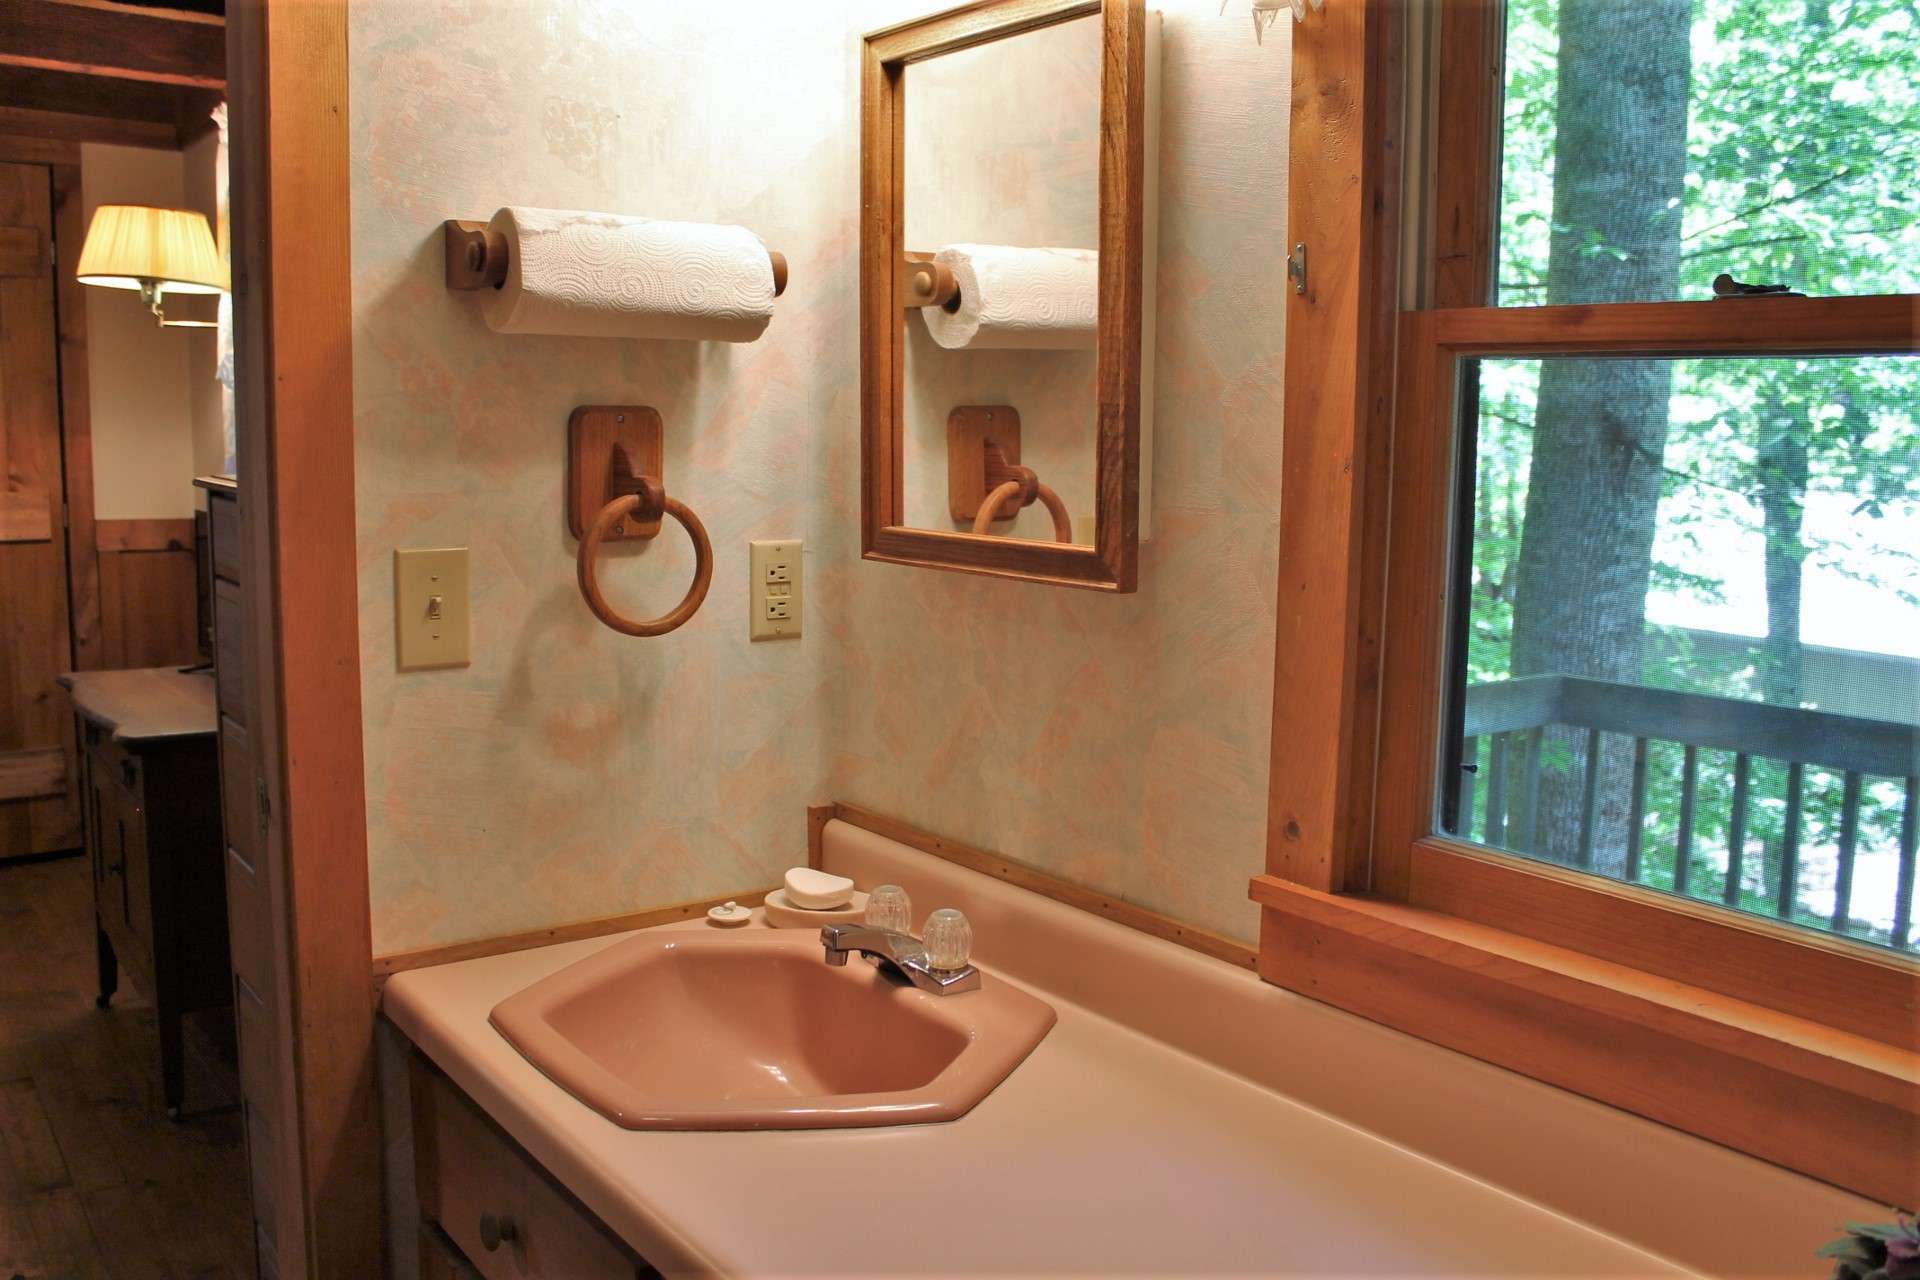 The master bath can be accessed directly from bedroom or the family room.